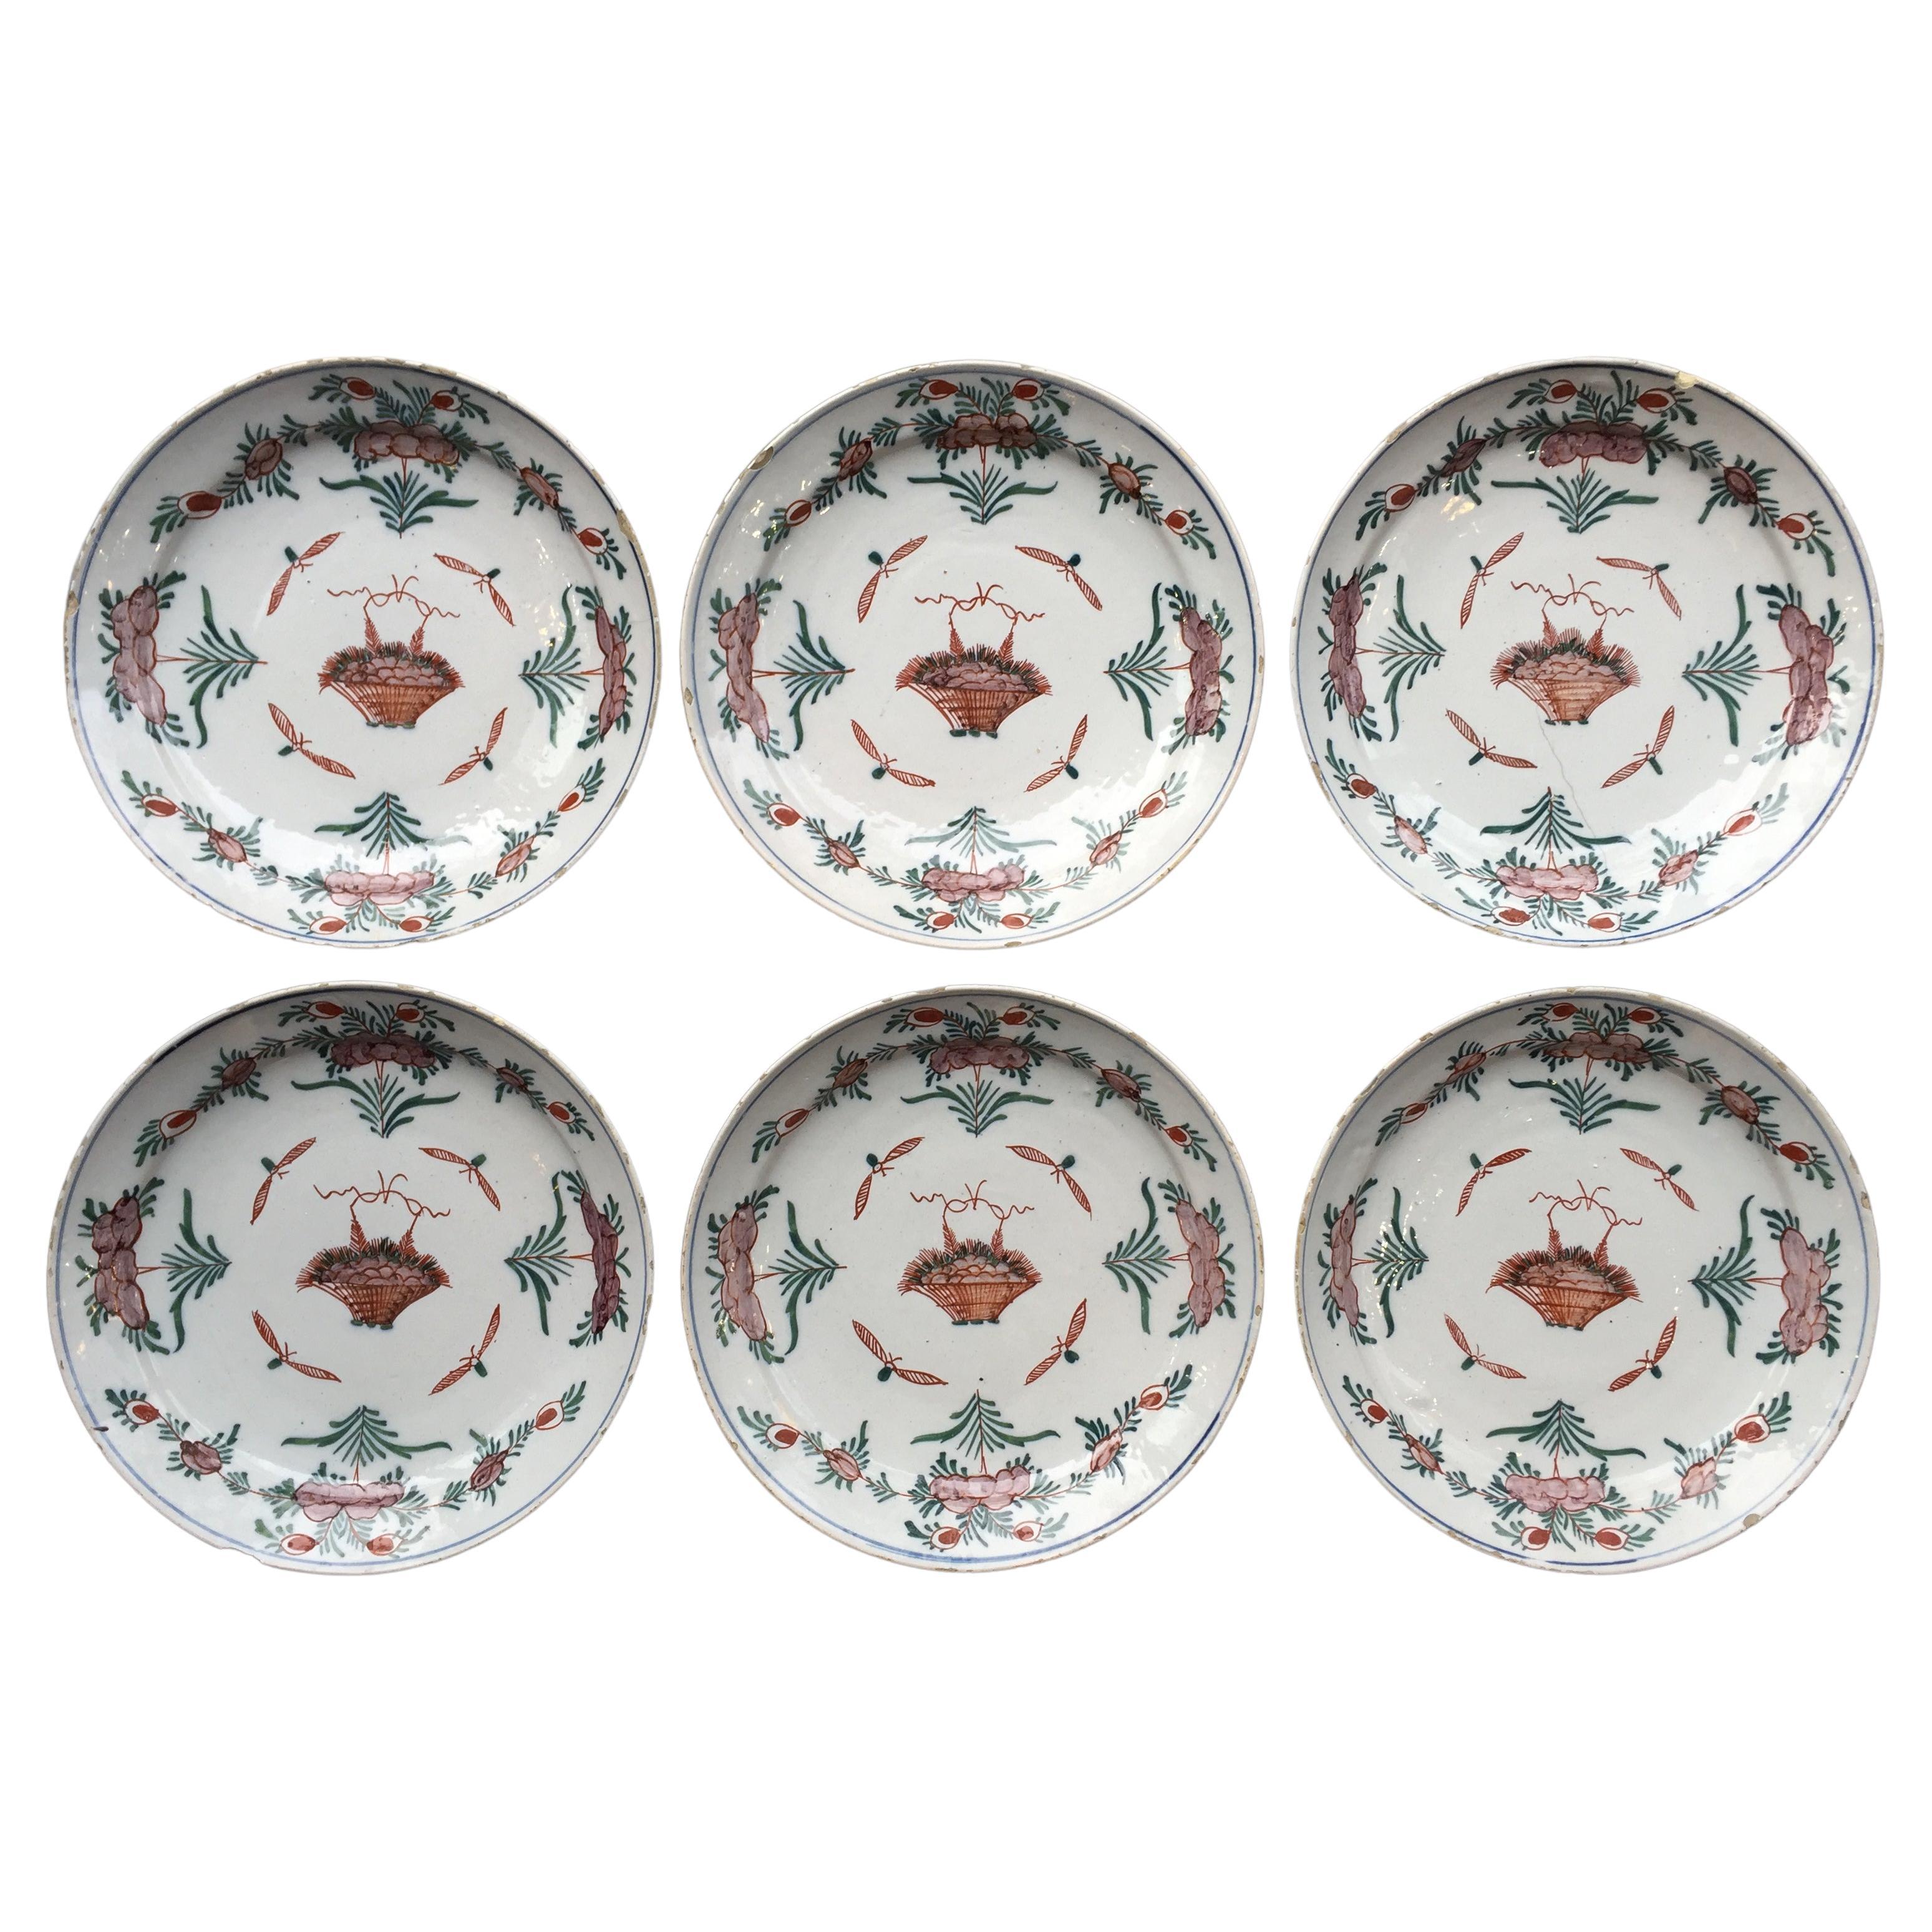 Set of 6 Dutch Delft Plates with Flower Baskets, 18th Century